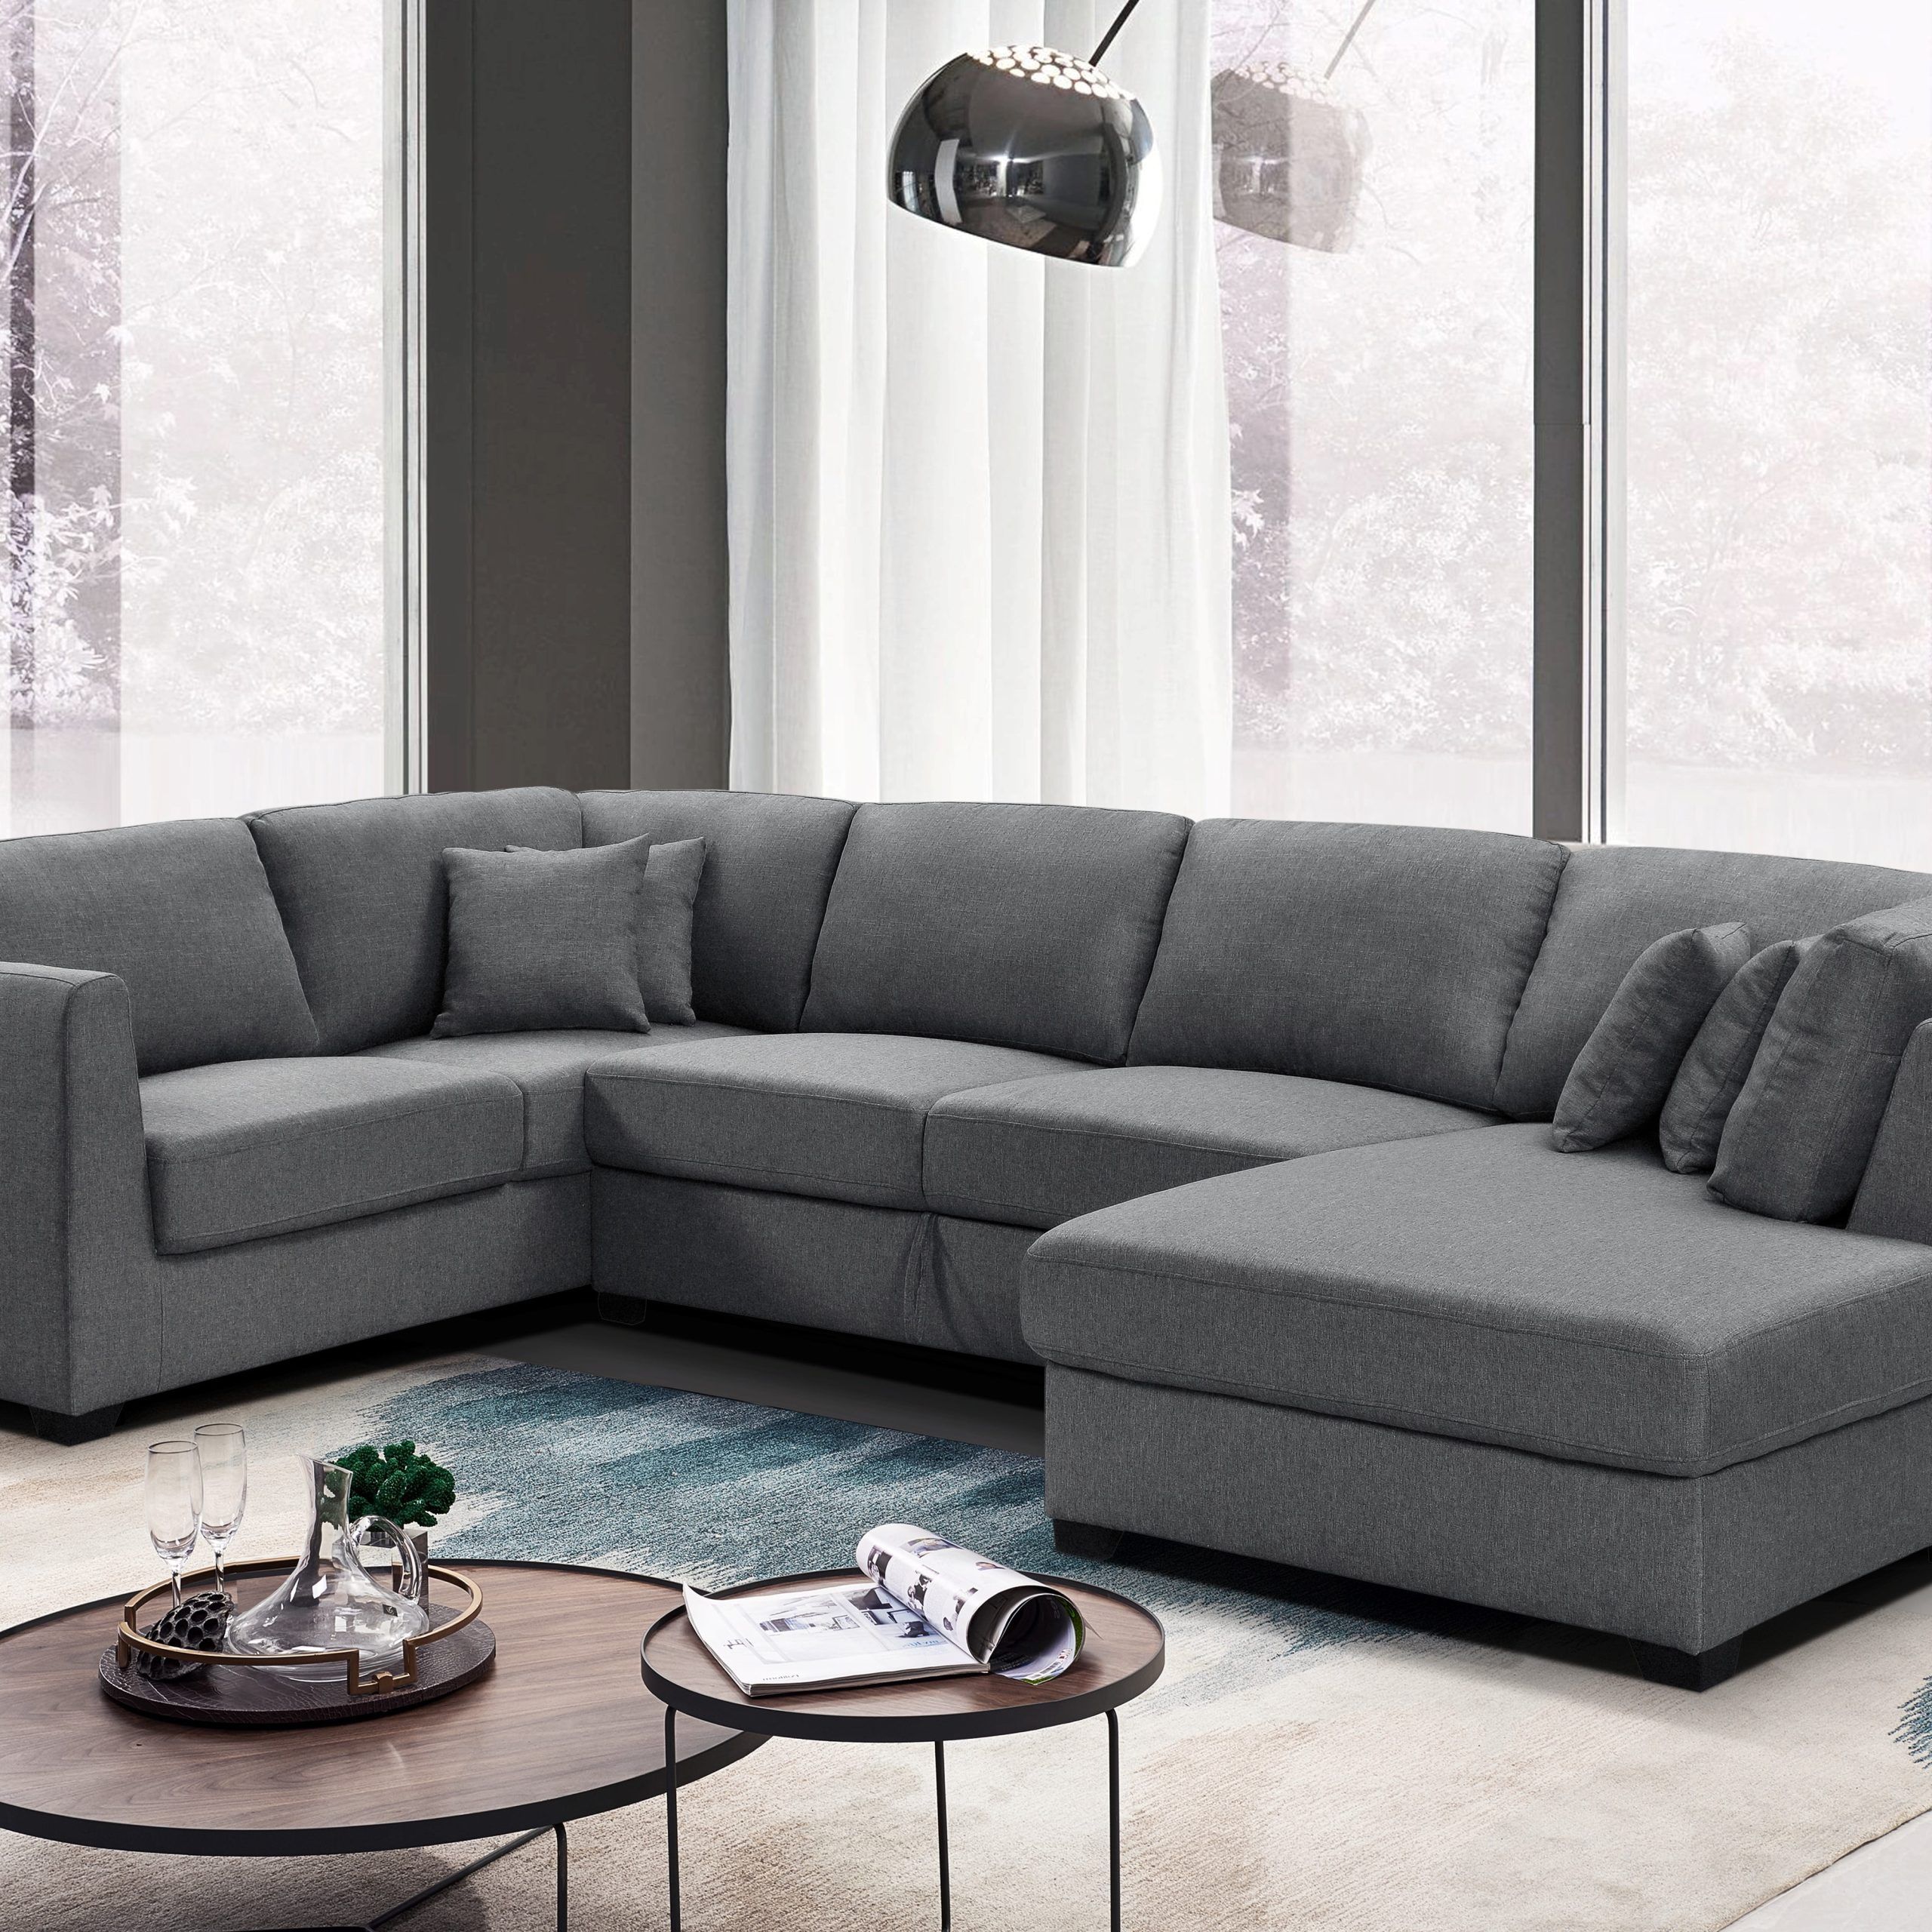 Gray U Shape Sectional Sofa With Storage – Walmart – Walmart Pertaining To Modern U Shape Sectional Sofas In Gray (Gallery 8 of 20)